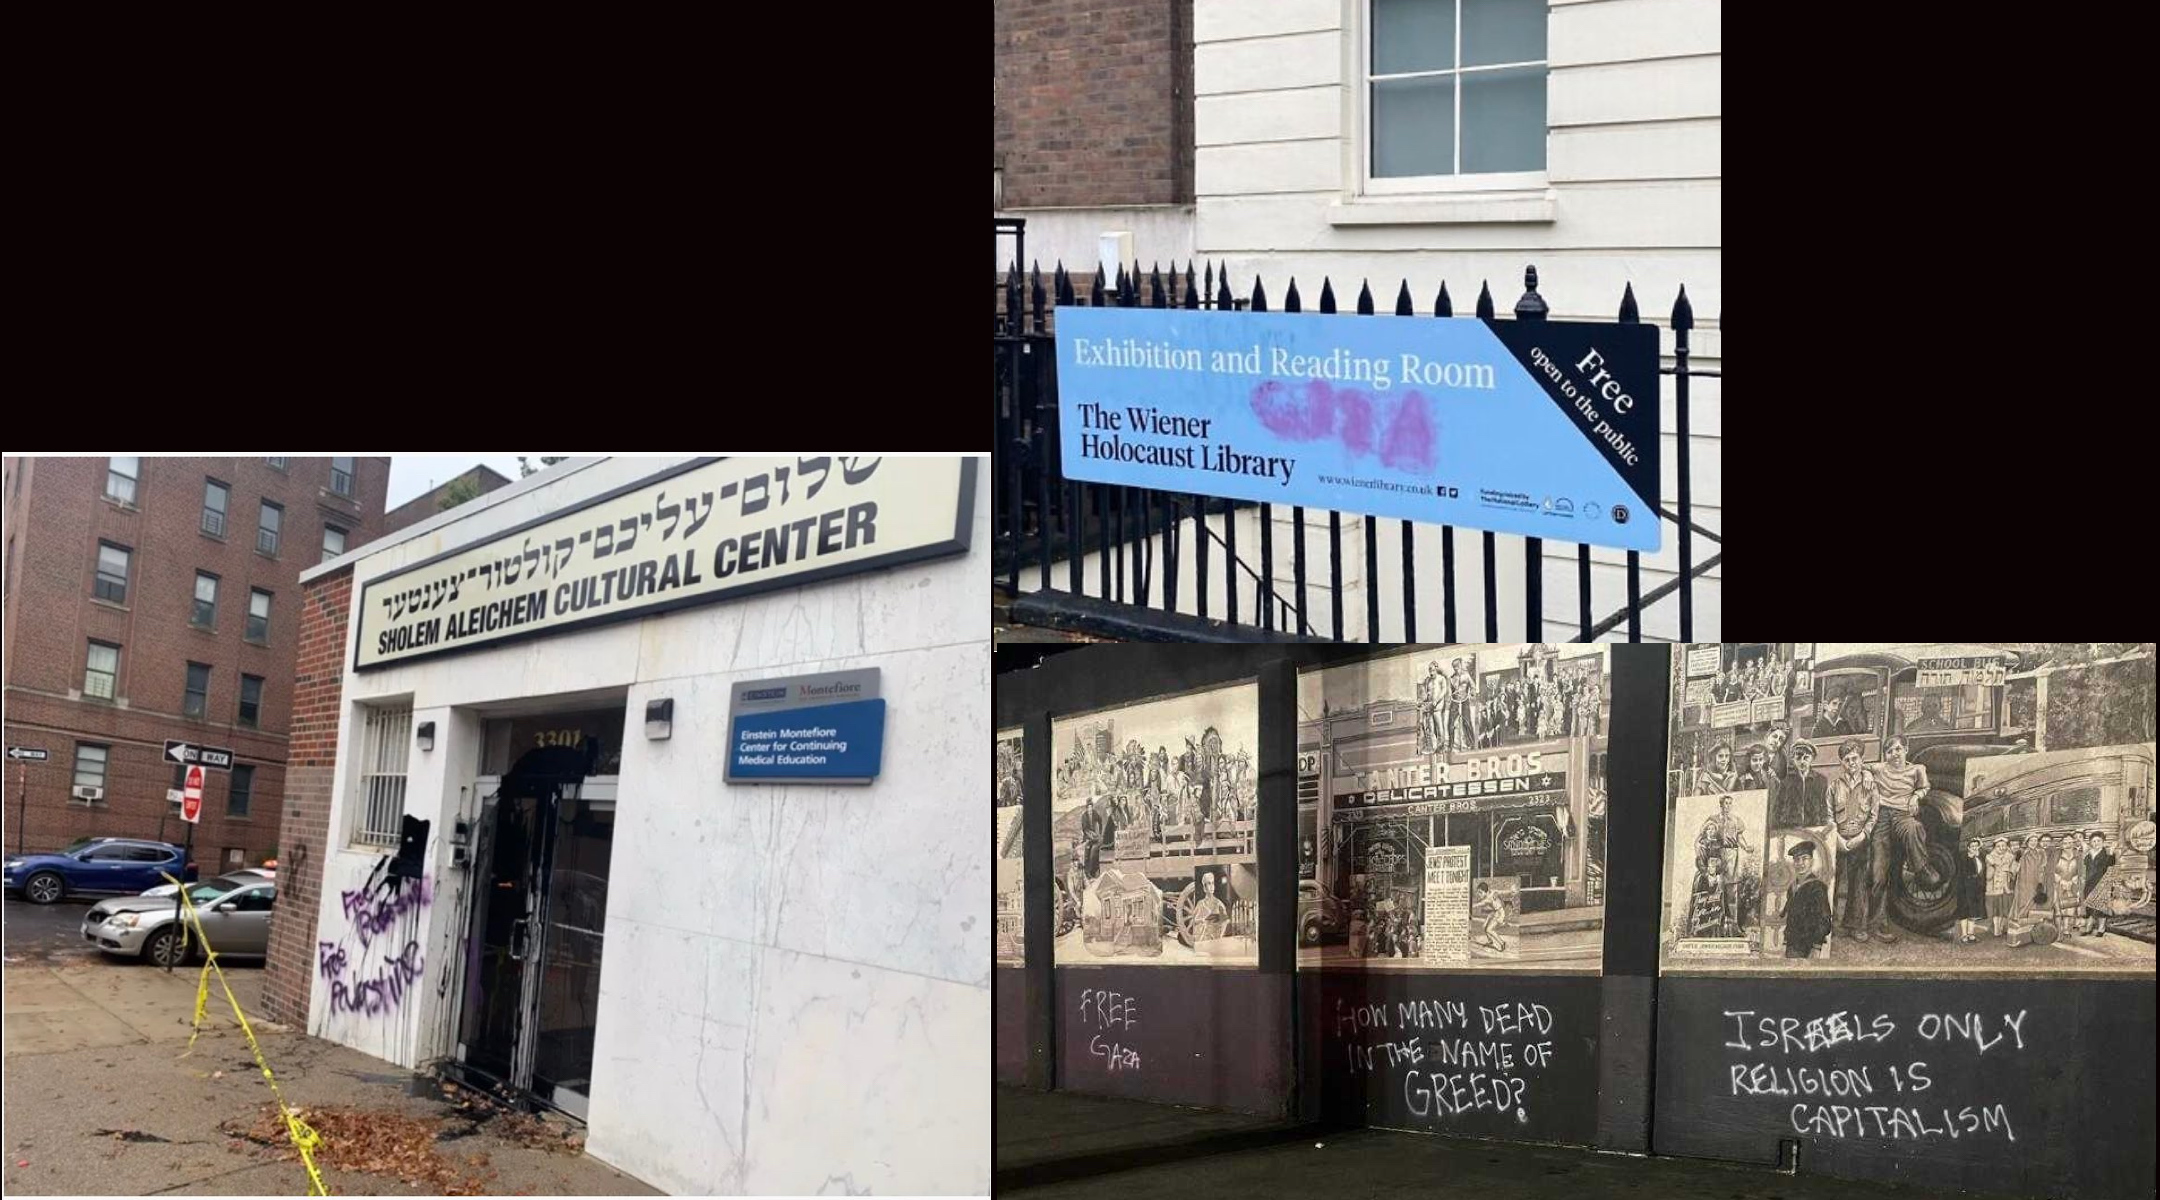 In the Bronx, London and Los Angeles, Jewish sites have been graffitied with pro-Palestinian messages. (Sholem Aleichem Cultural Center picture via X; Wiener Holocaust Library via X; Canter’s Deli via ADL California)